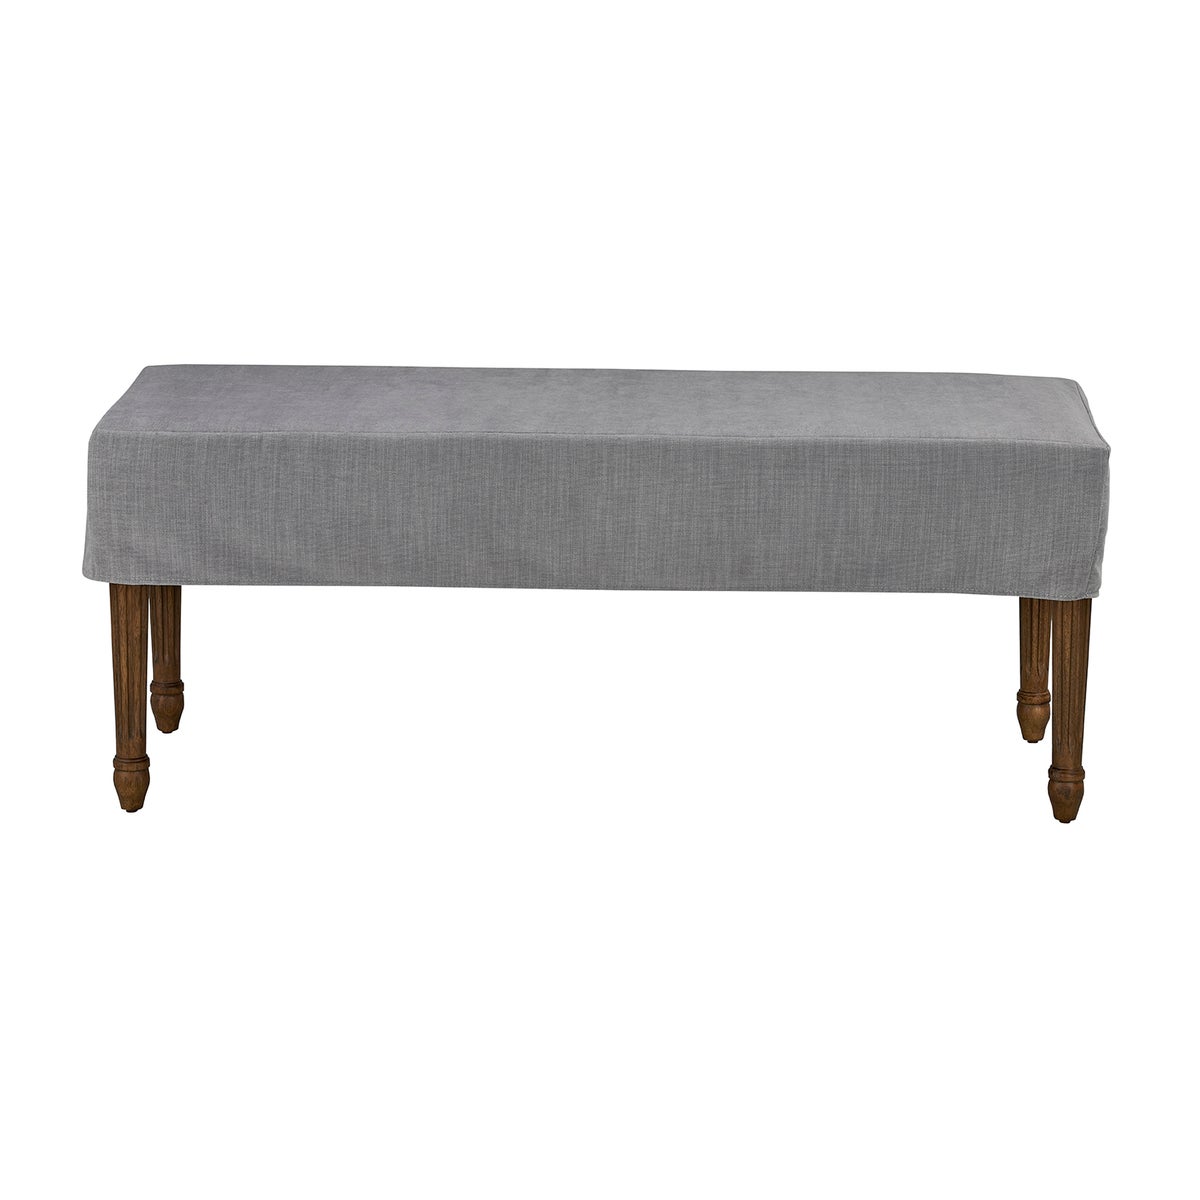 Bench Slip Cover-Washable + Reversible Gray